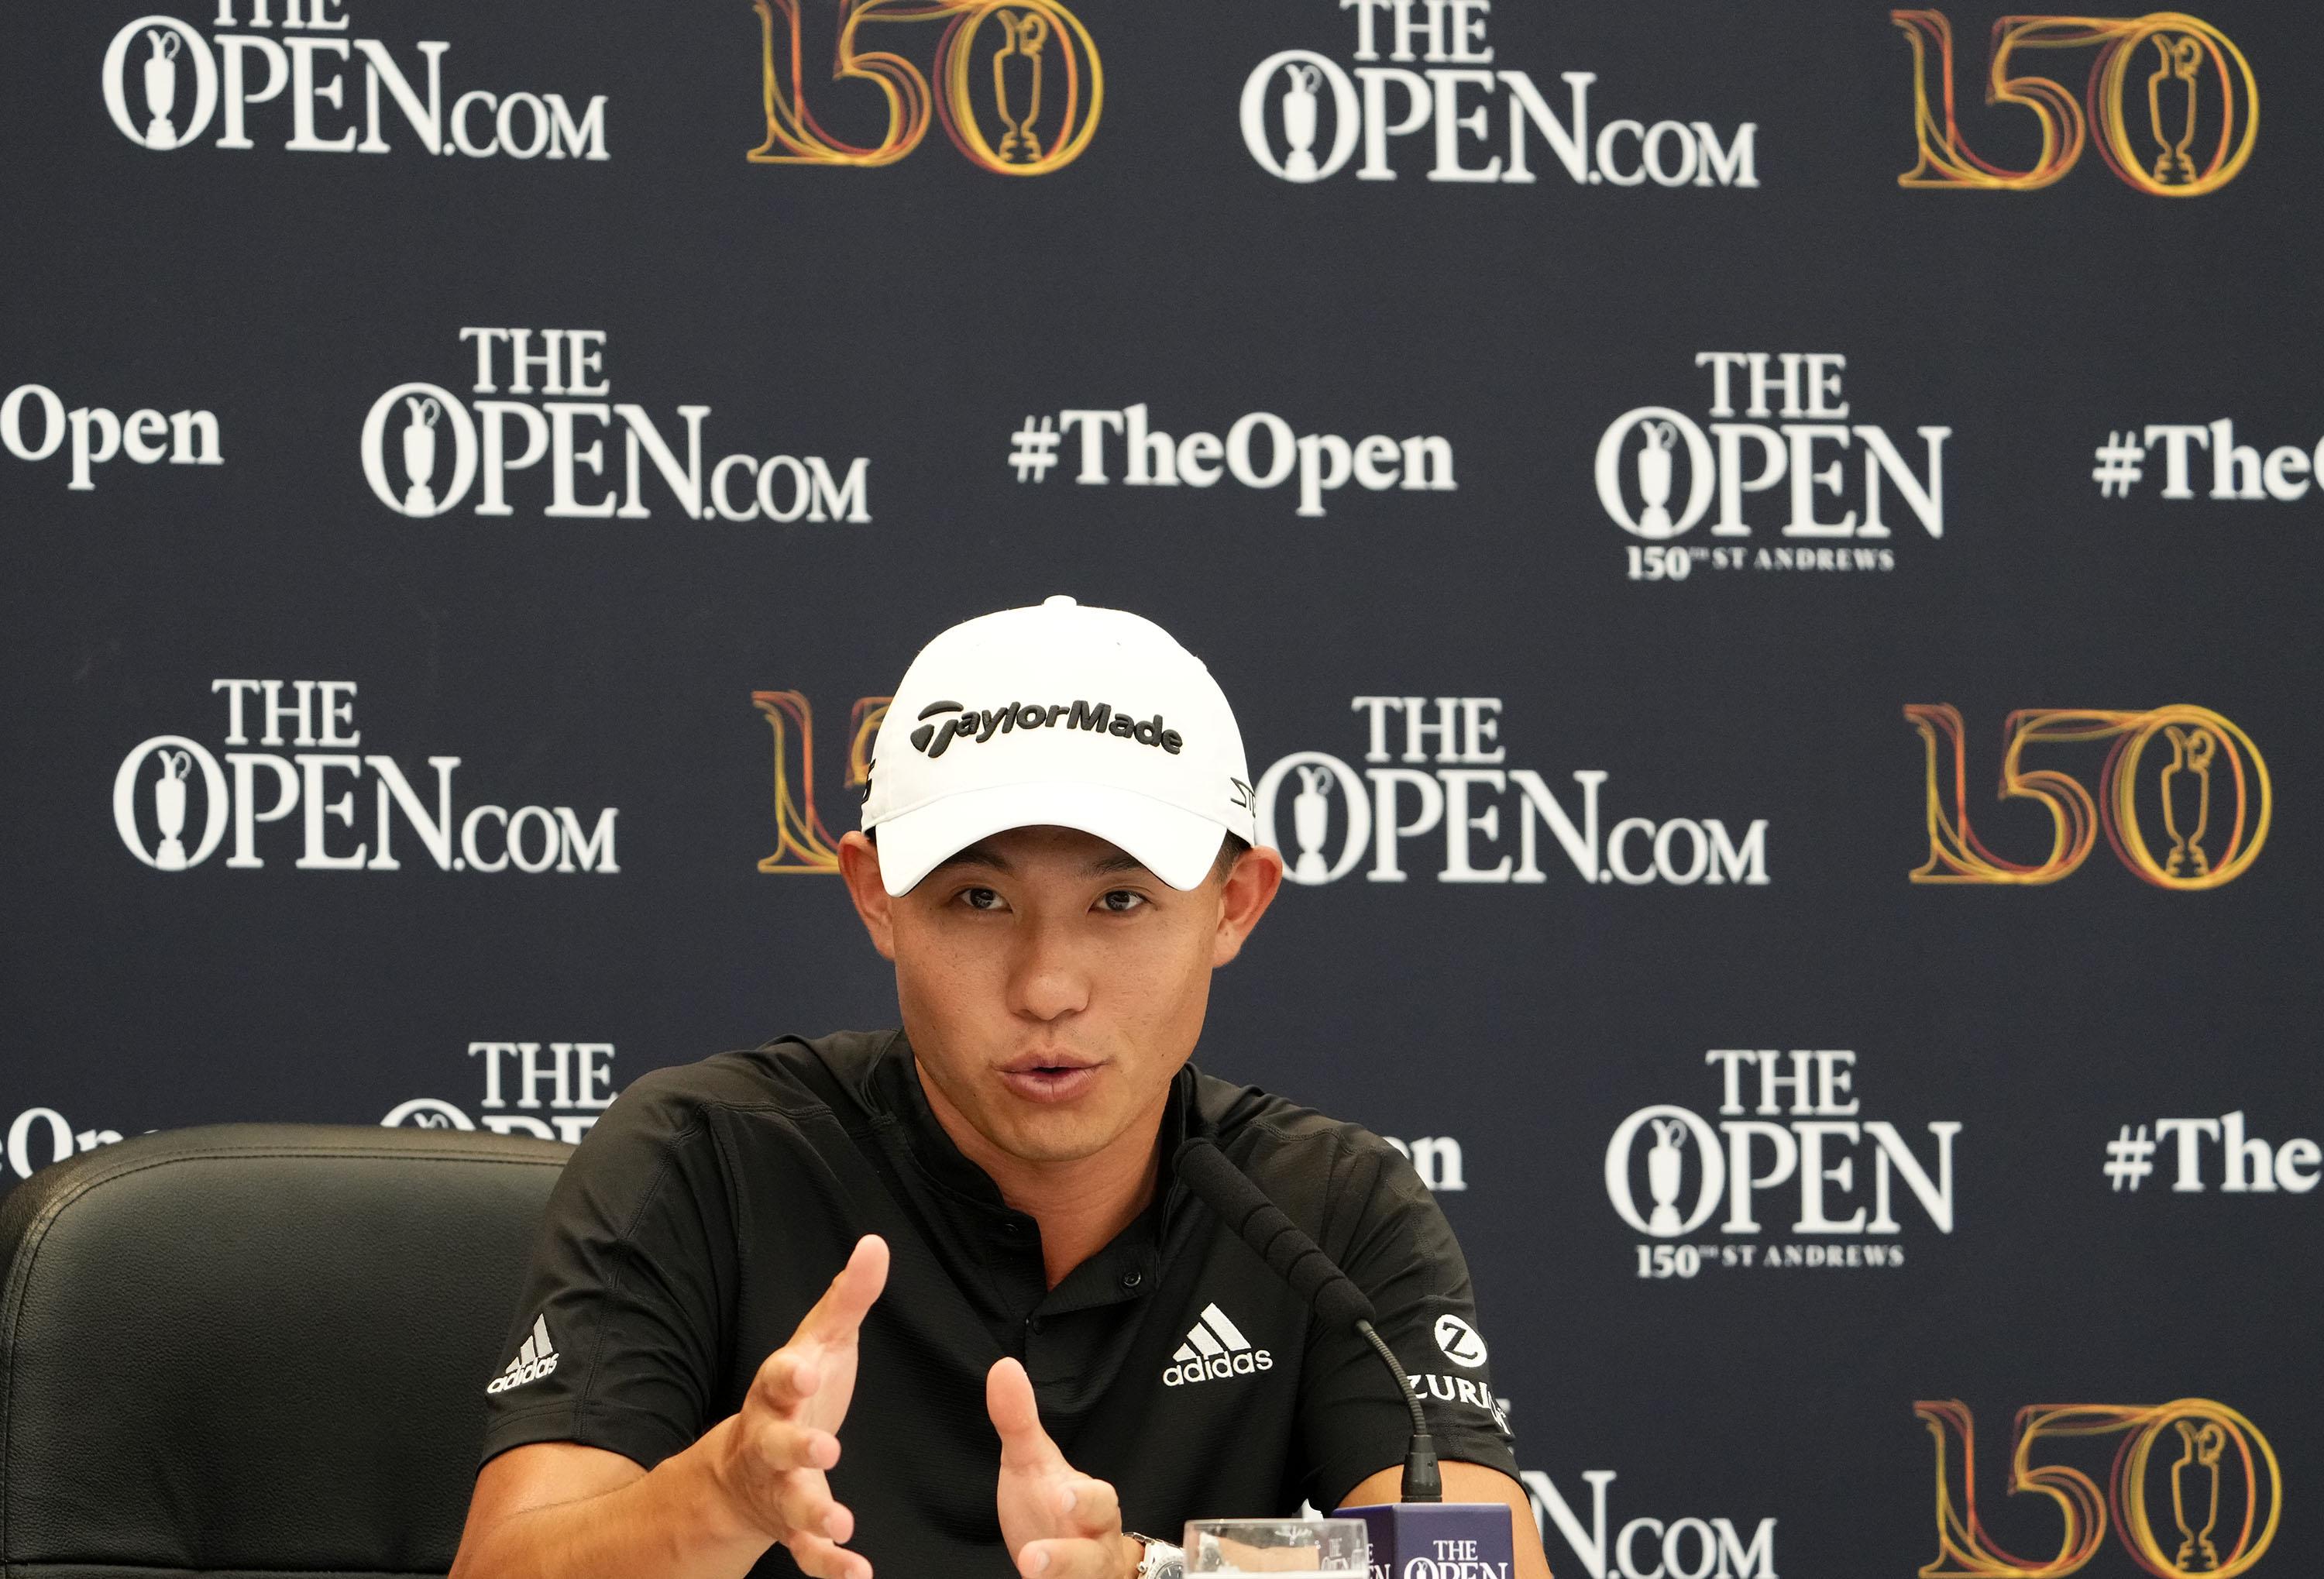 Collin Morikawa Open Championship 2022 Odds, History, Predictions & How to Watch